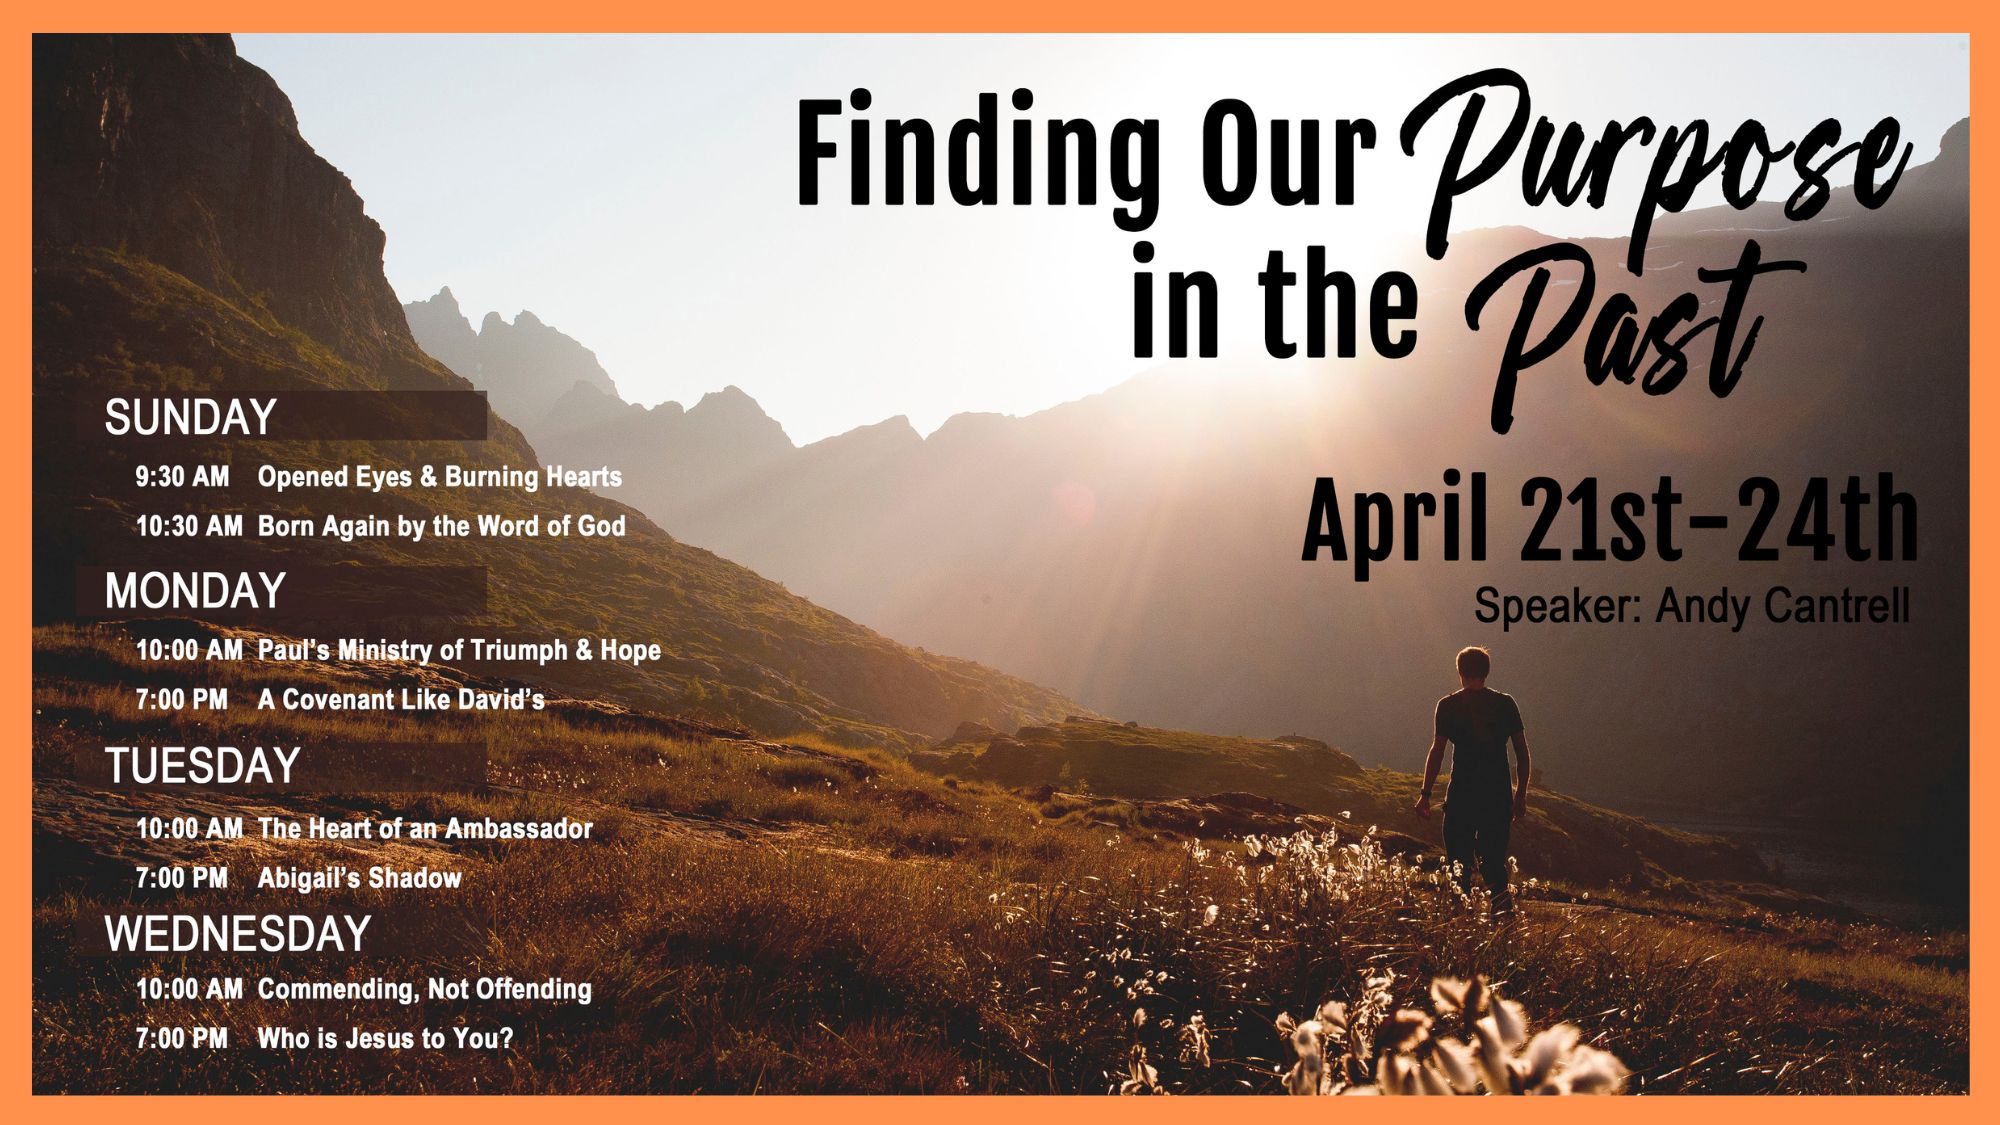 "Finding Our Purpose in the Past" - Who is Jesus to You?